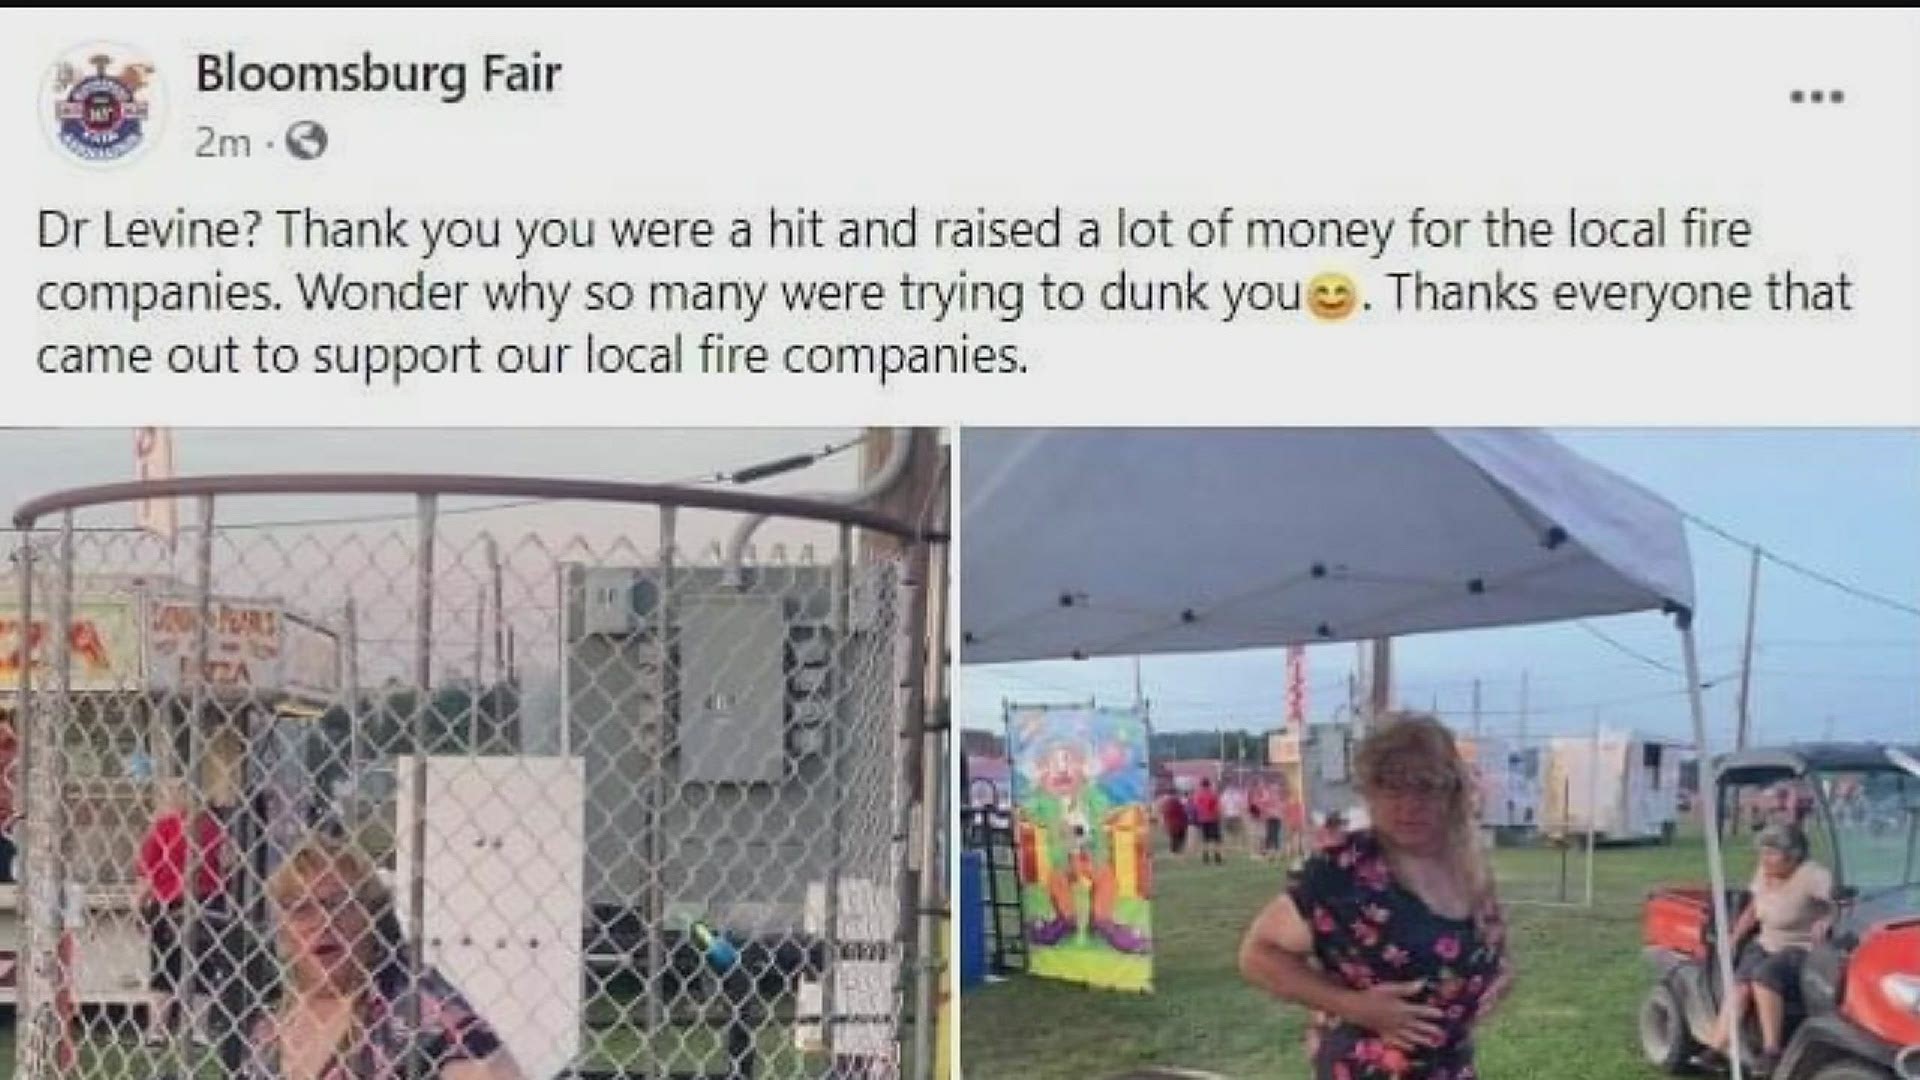 PICTURES SHARED ON FACEBOOK FROM A CARNIVAL FUNDRAISER IS GETTING A LOT OF ATTENTION AND BACKLASH THIS MORNING, ACROSS PENNSYLVANIA FOR TRANSPHOBIA